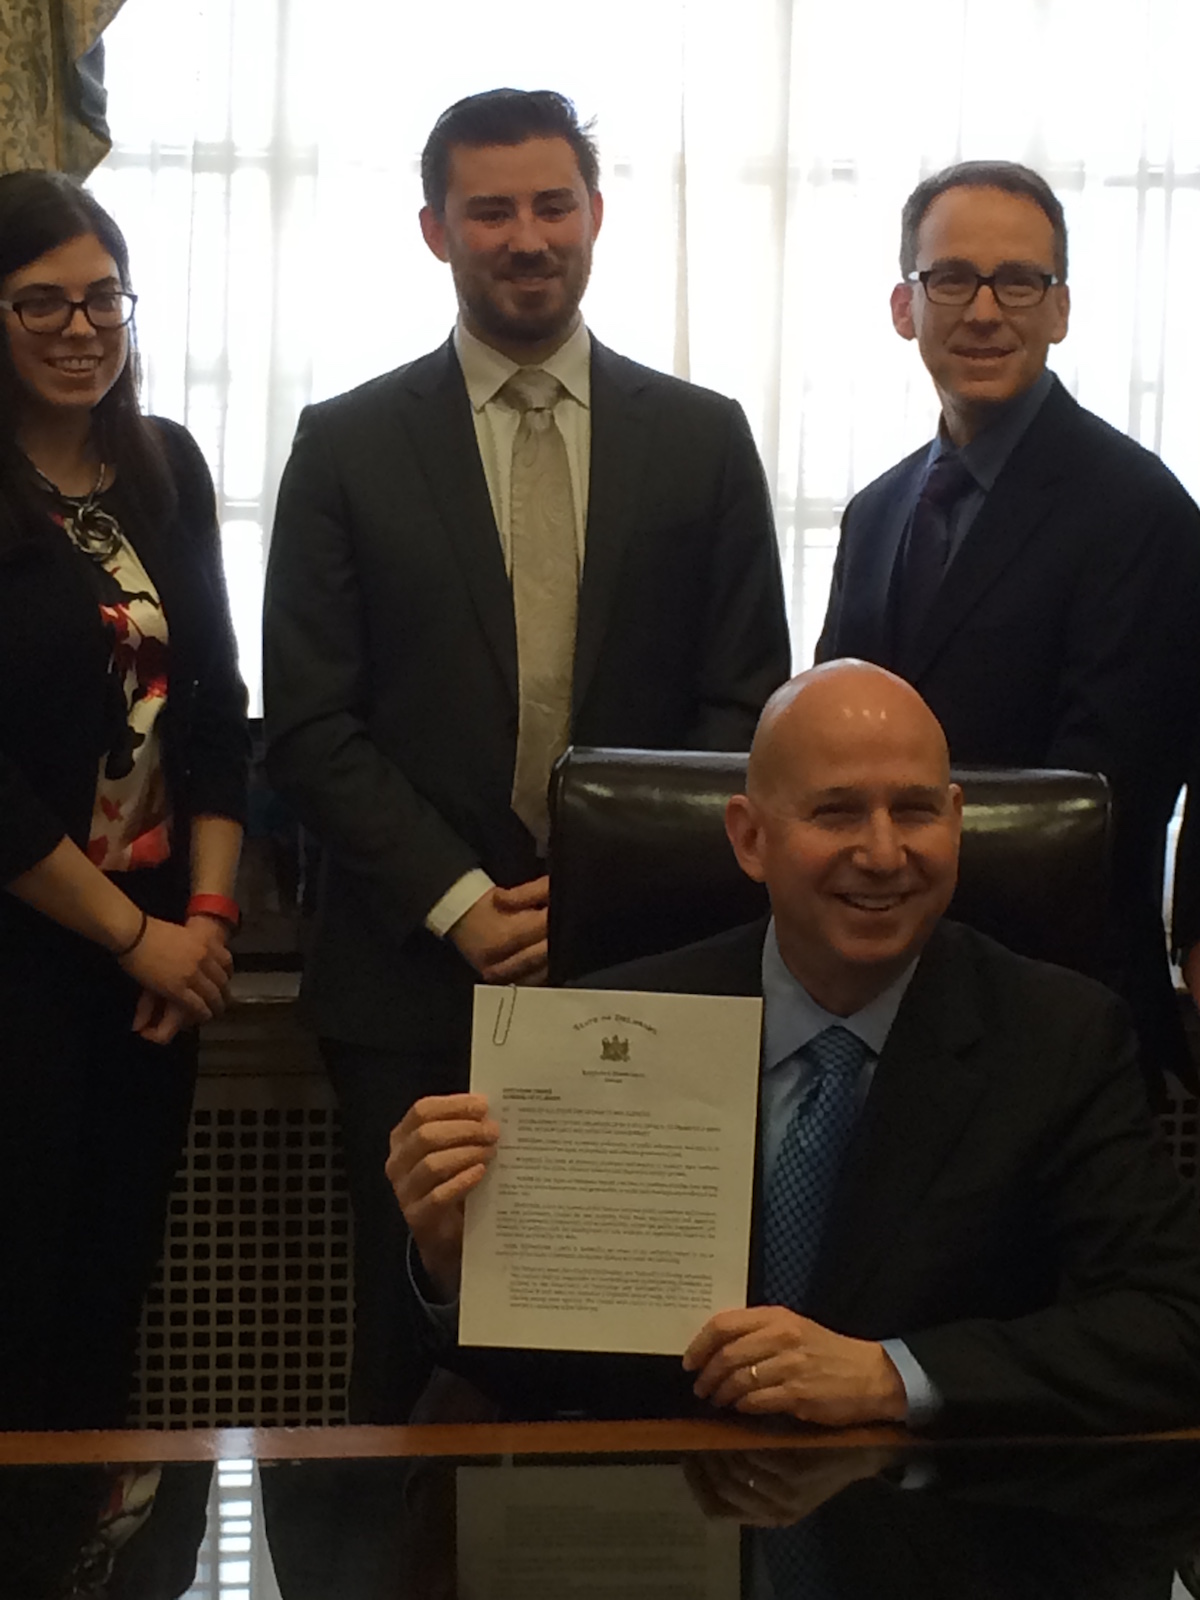 Gov. Jack Markell holds up the open data executive order.